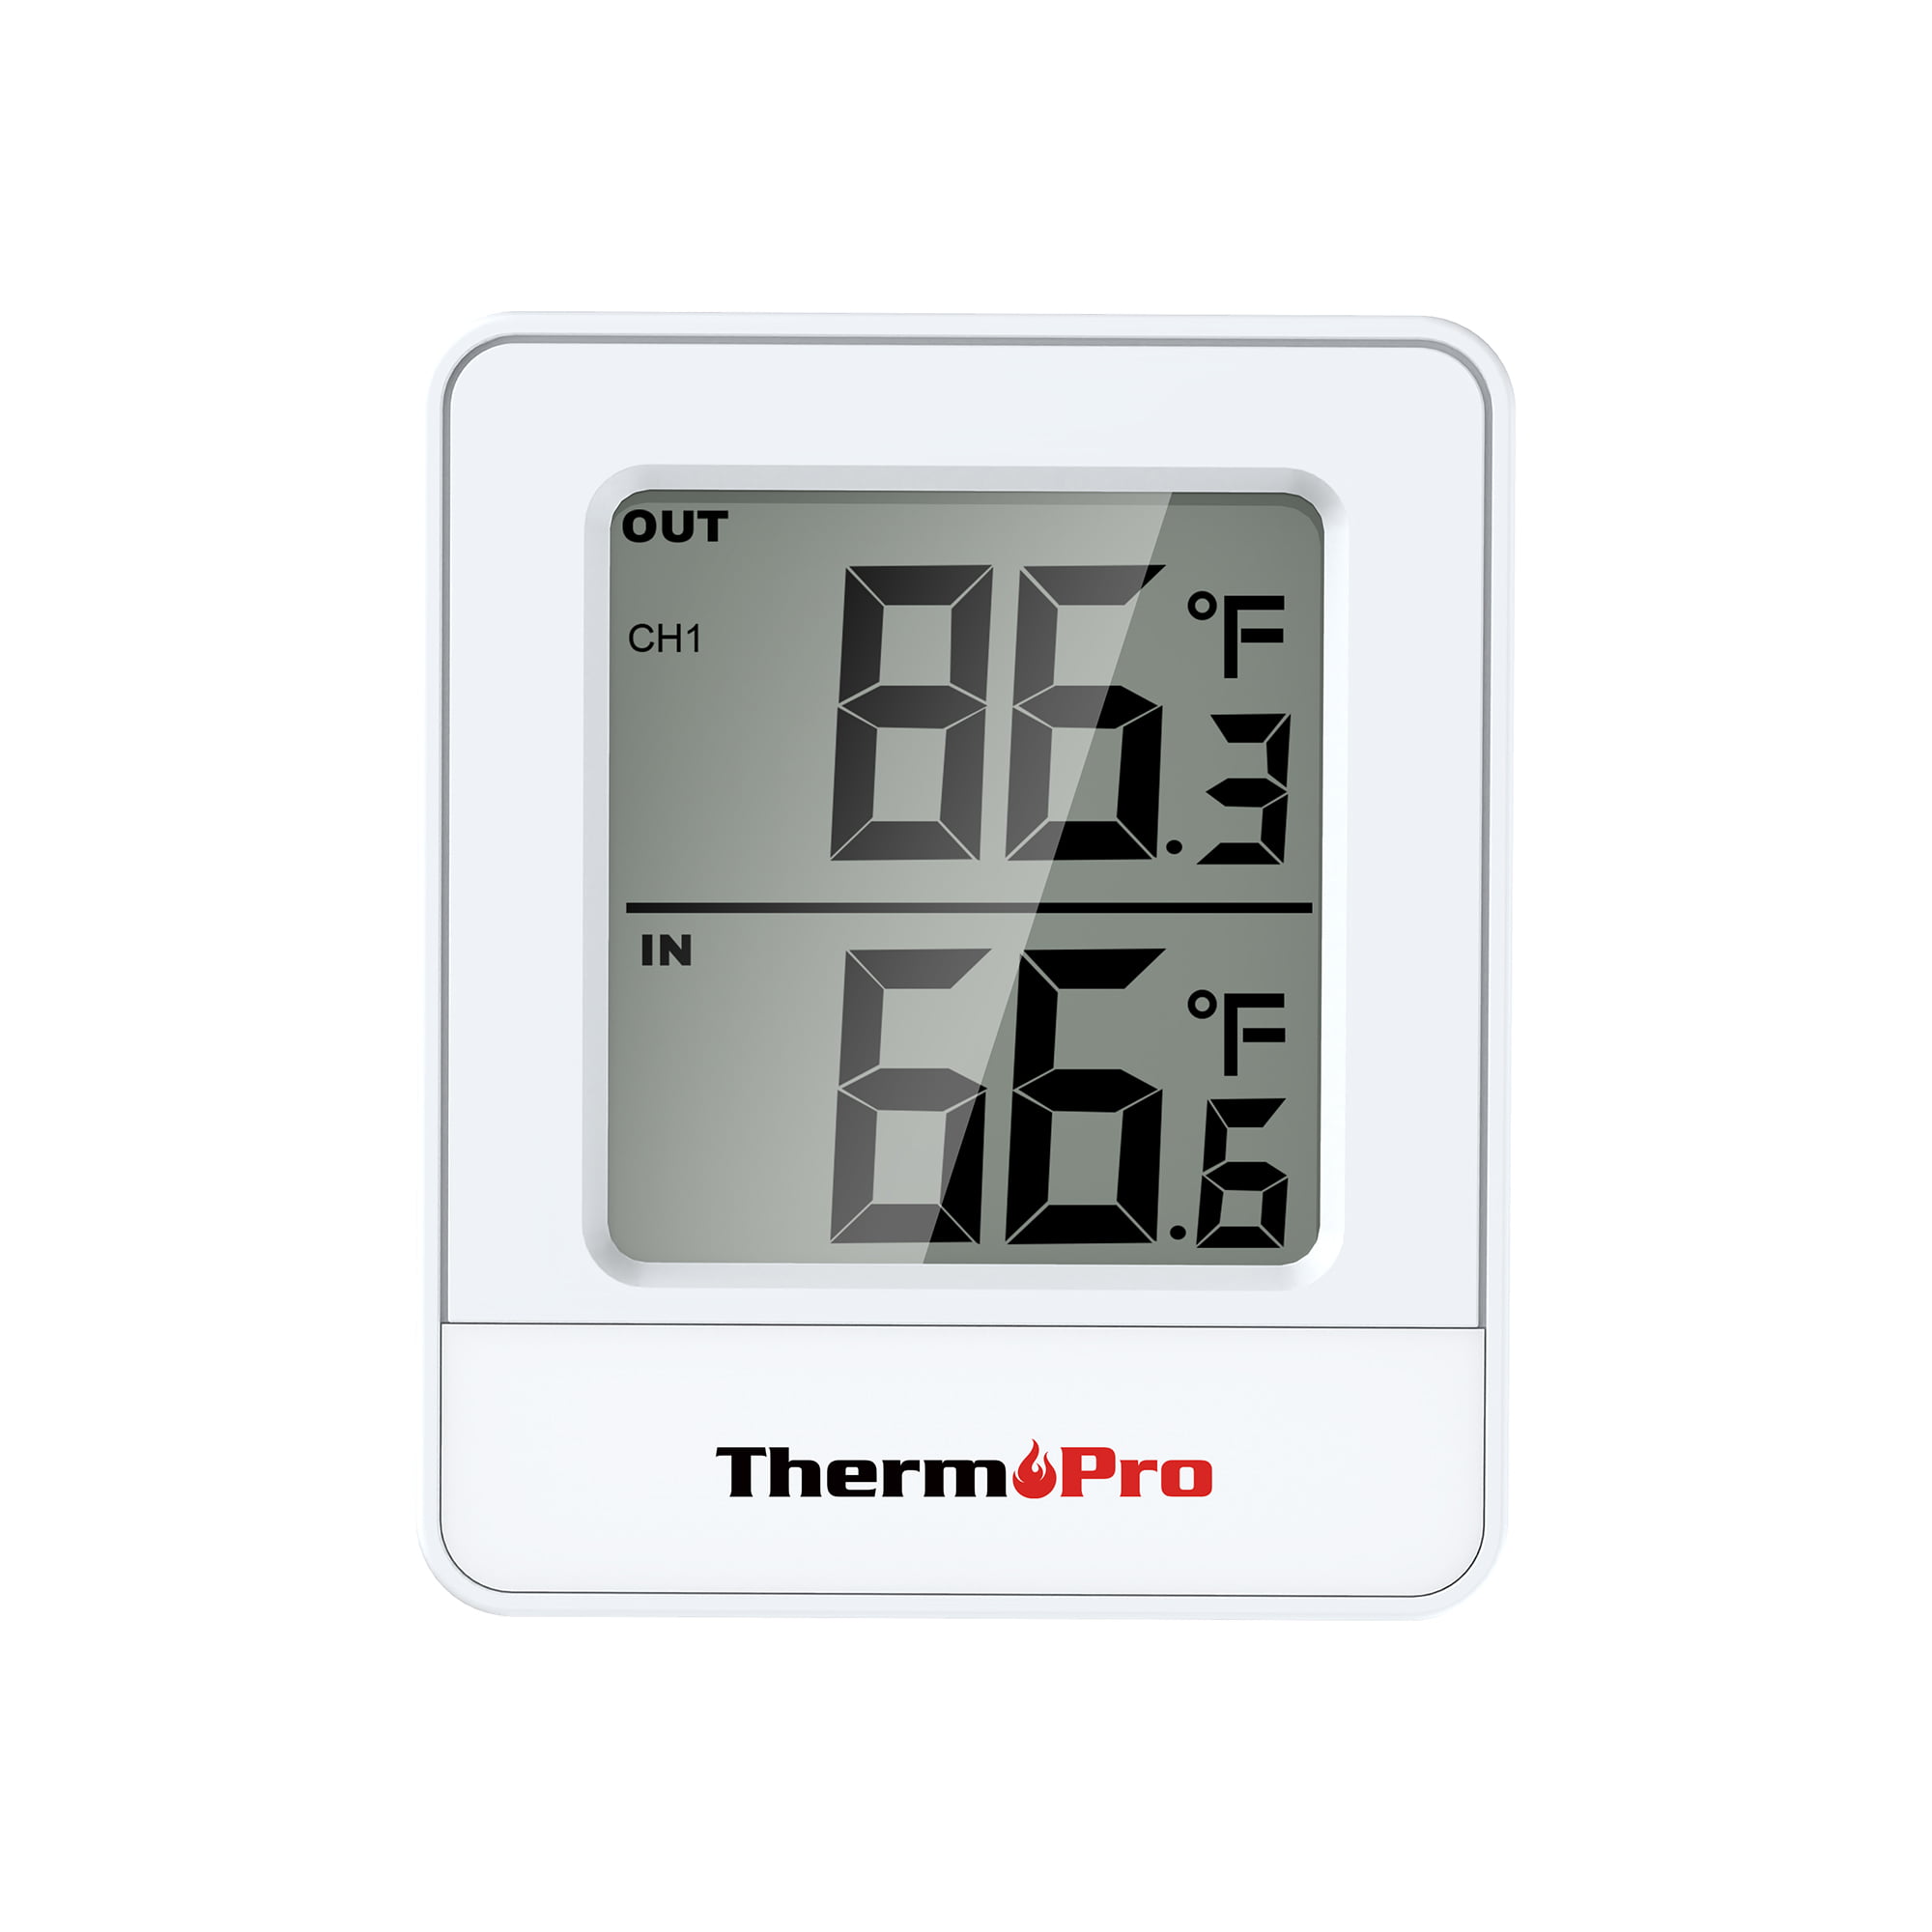 ThermoPro TP68B 500ft Weather Station Thermometer Indoor Outdoor